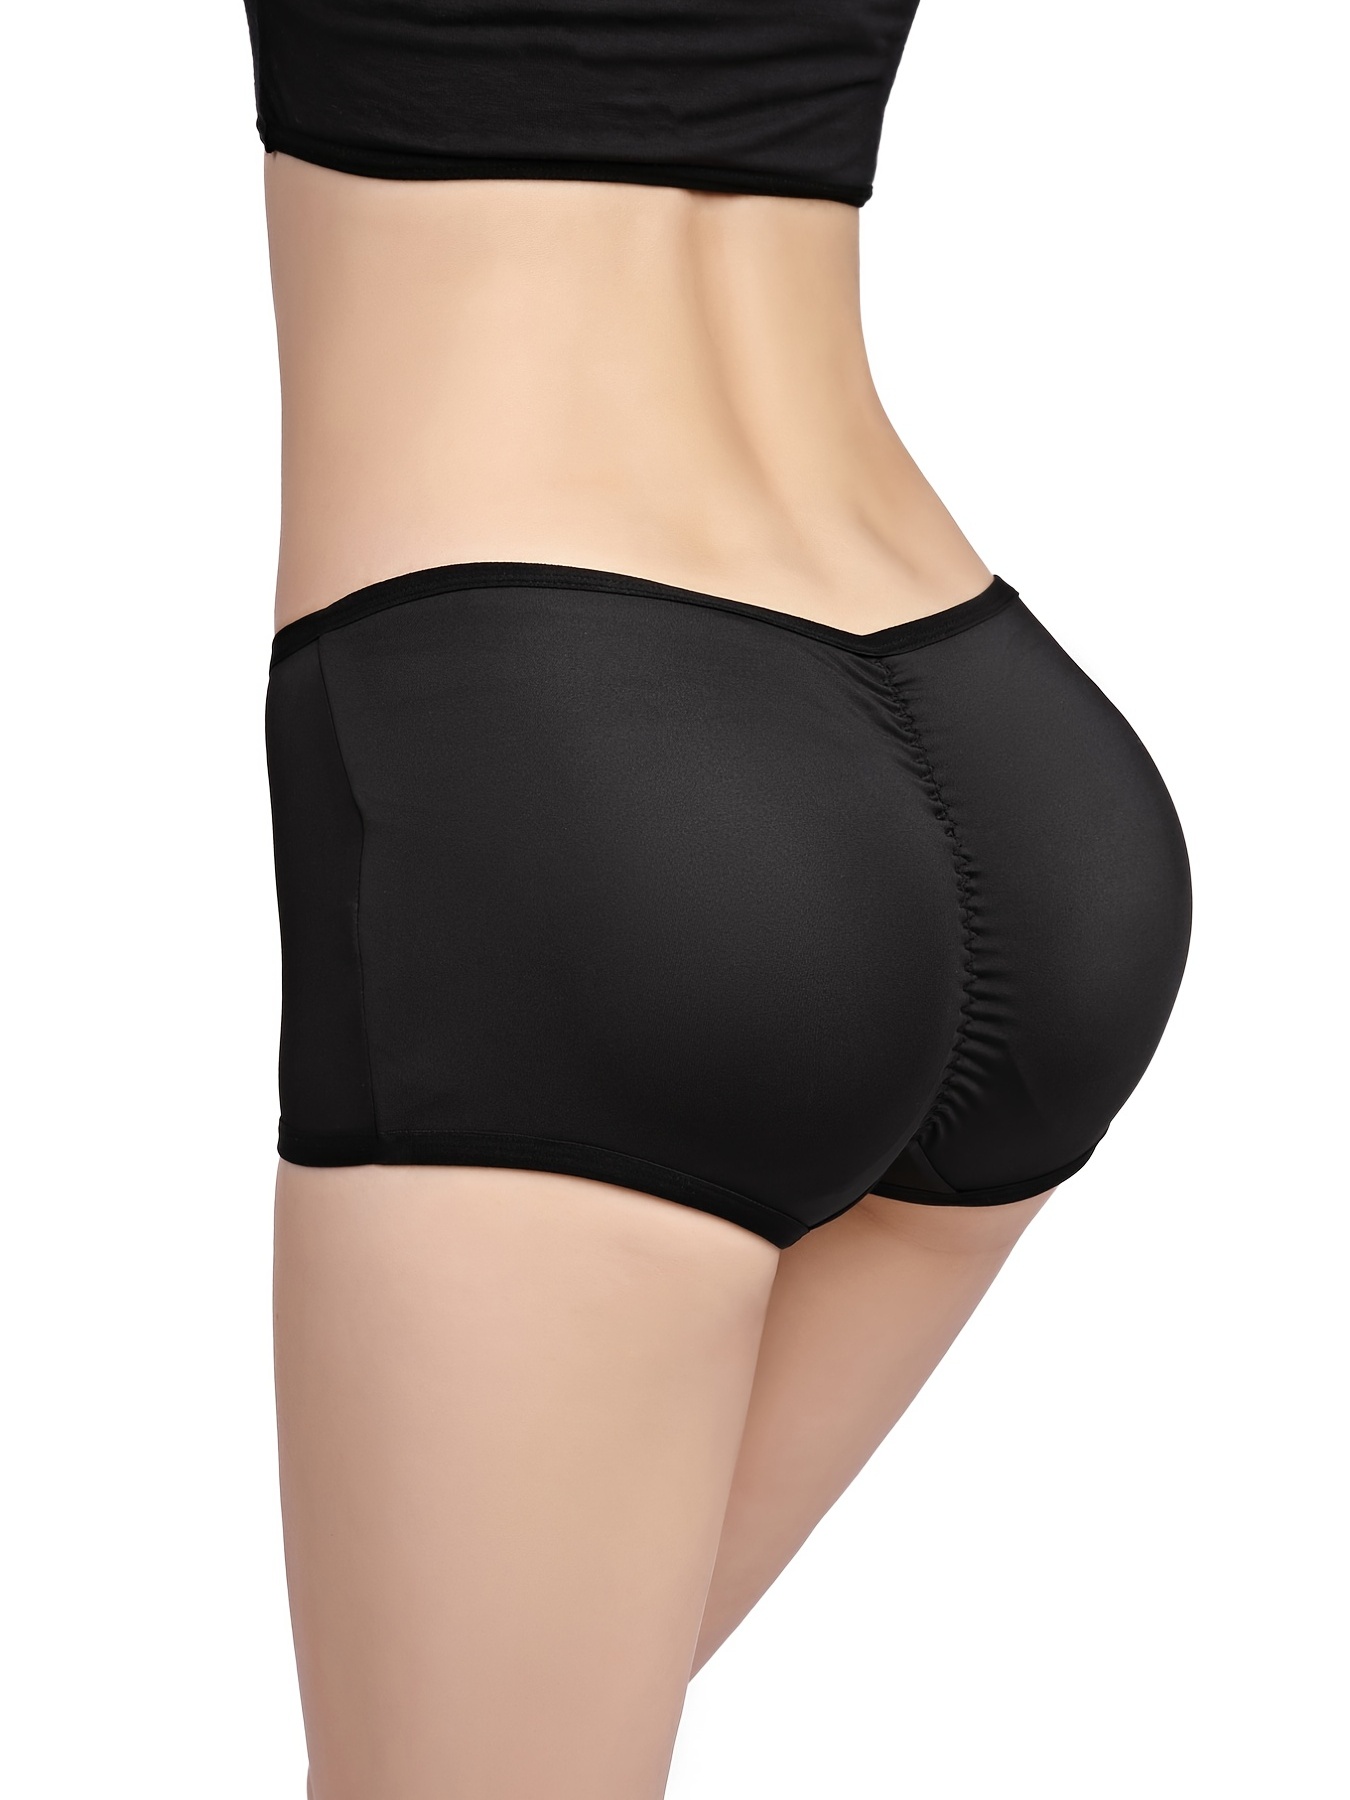 Women's Fake Butt Padded Adjustable Panties, Comfortable Butt Lifting  Shorts, High Coverage Women's Underwear & Lingerie